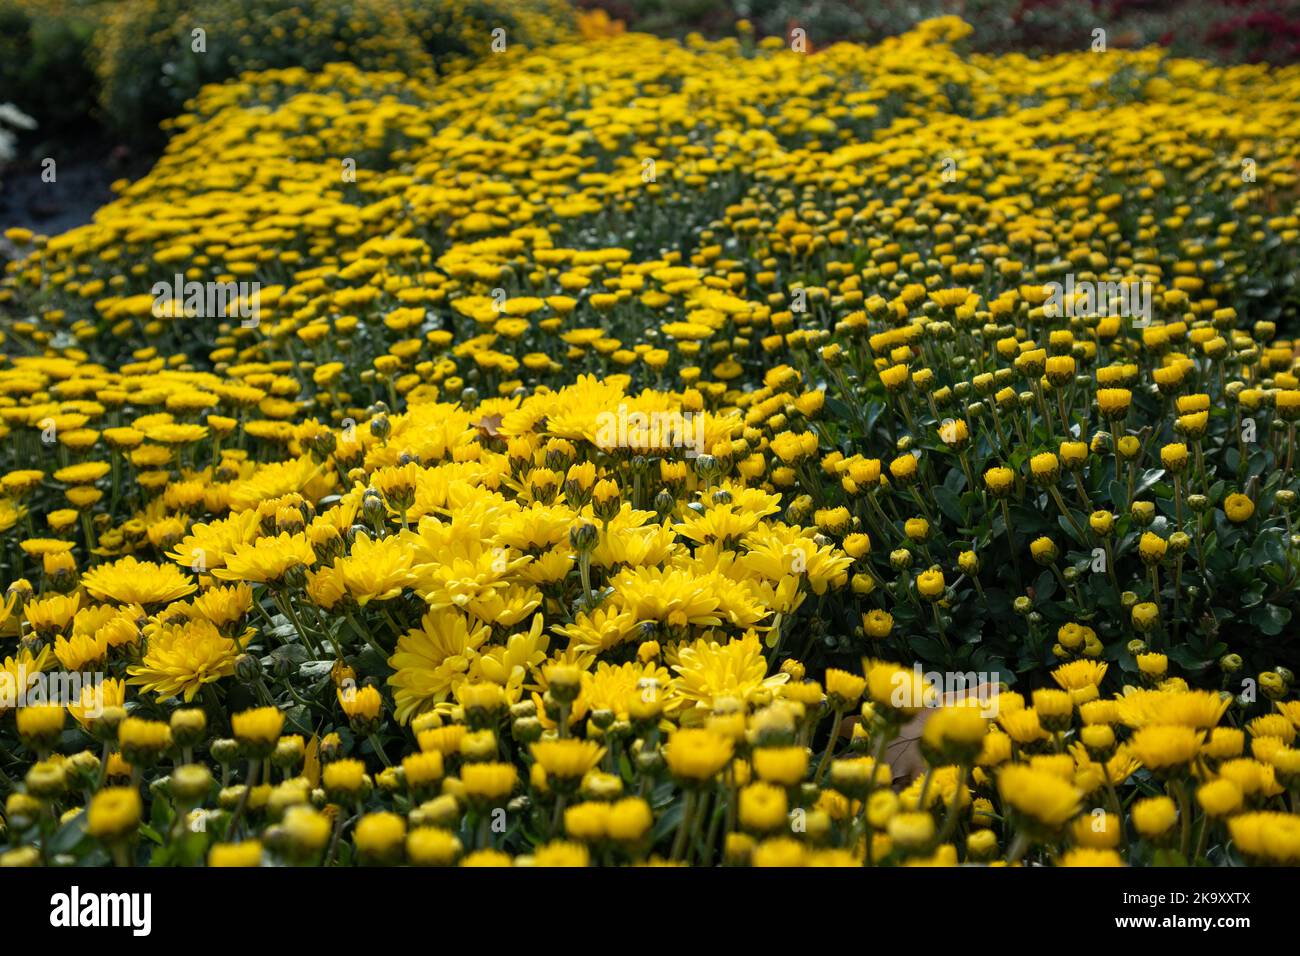 Yellow tender flowers blooming close-up. Chrysanthemums, chrysanths autumn flowerbed with blurred background Stock Photo